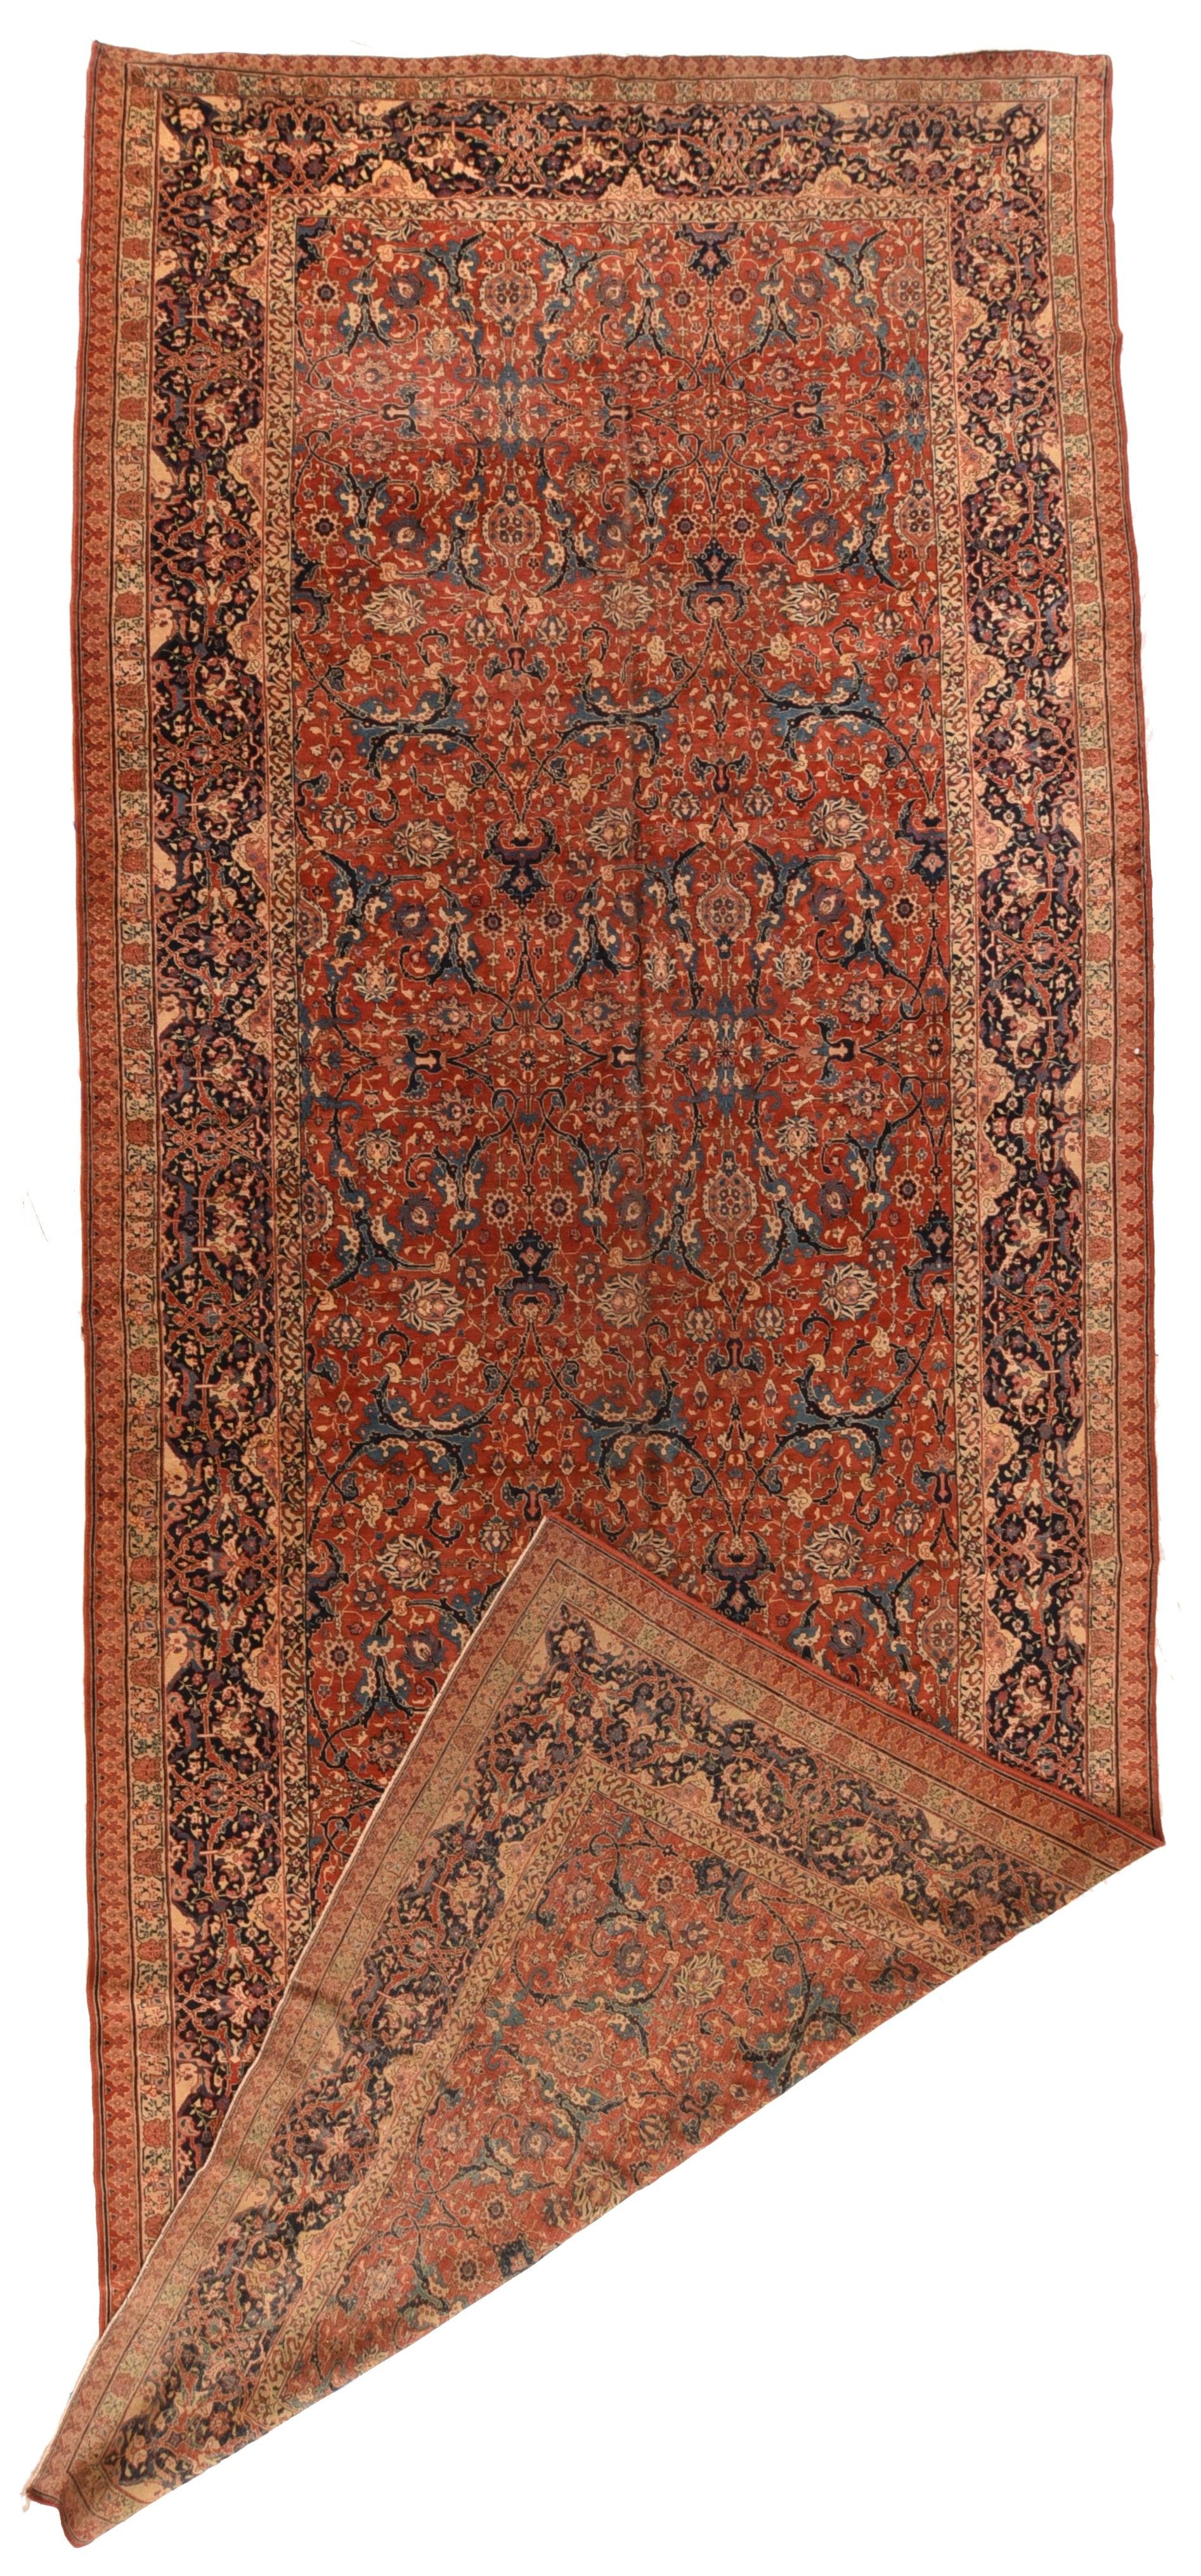 Fine Antique Persian Tabriz Rug 7'5'' x 17'4'' In Good Condition For Sale In New York, NY